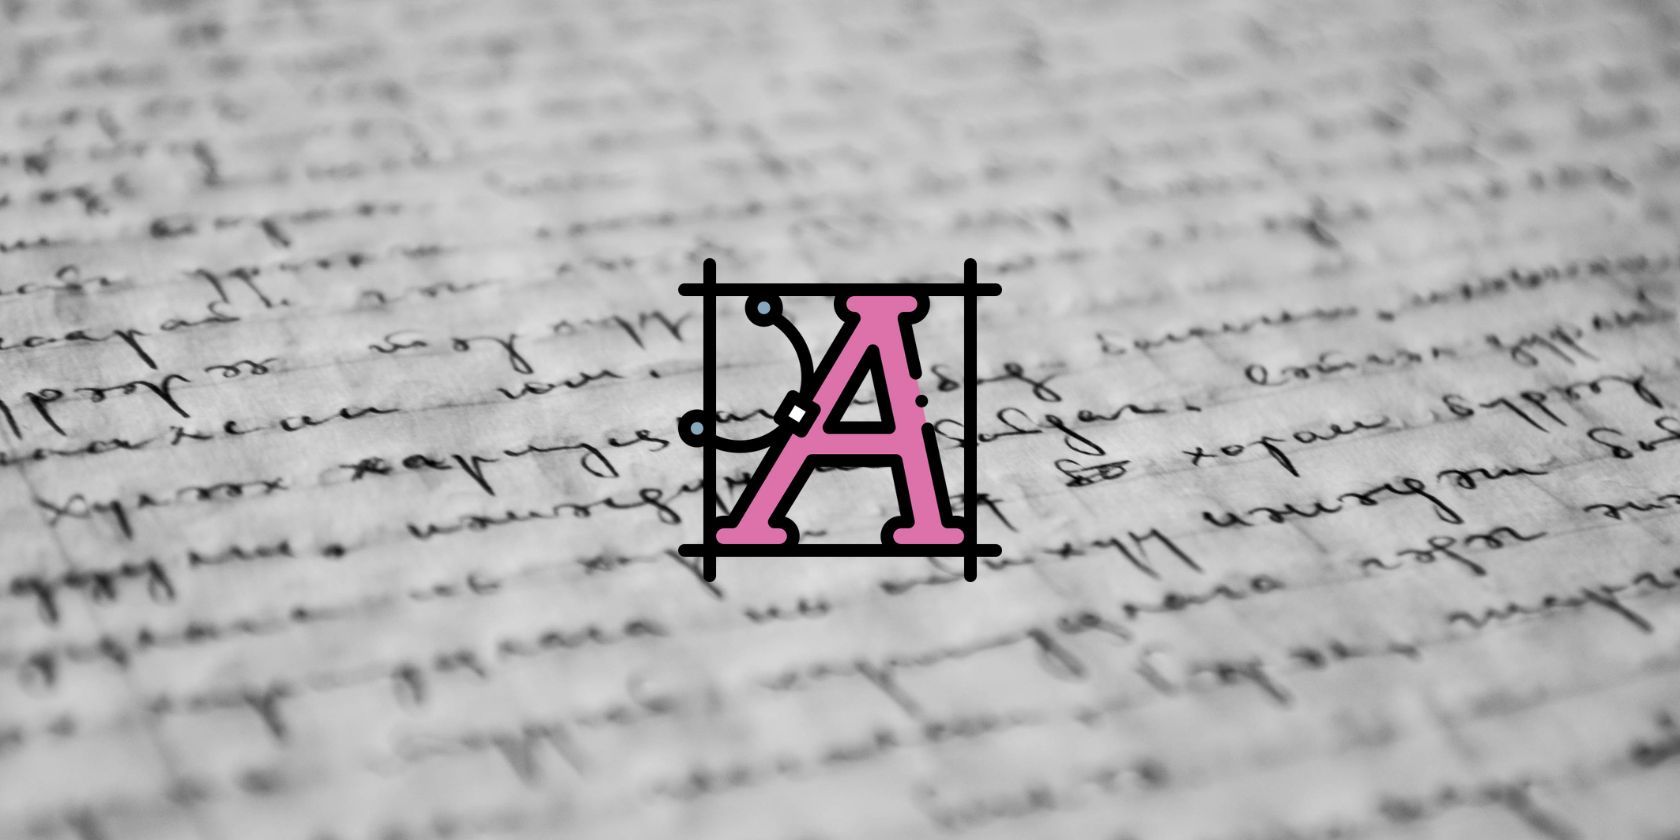 An image of the letter A in the center with an image of a written document as the background